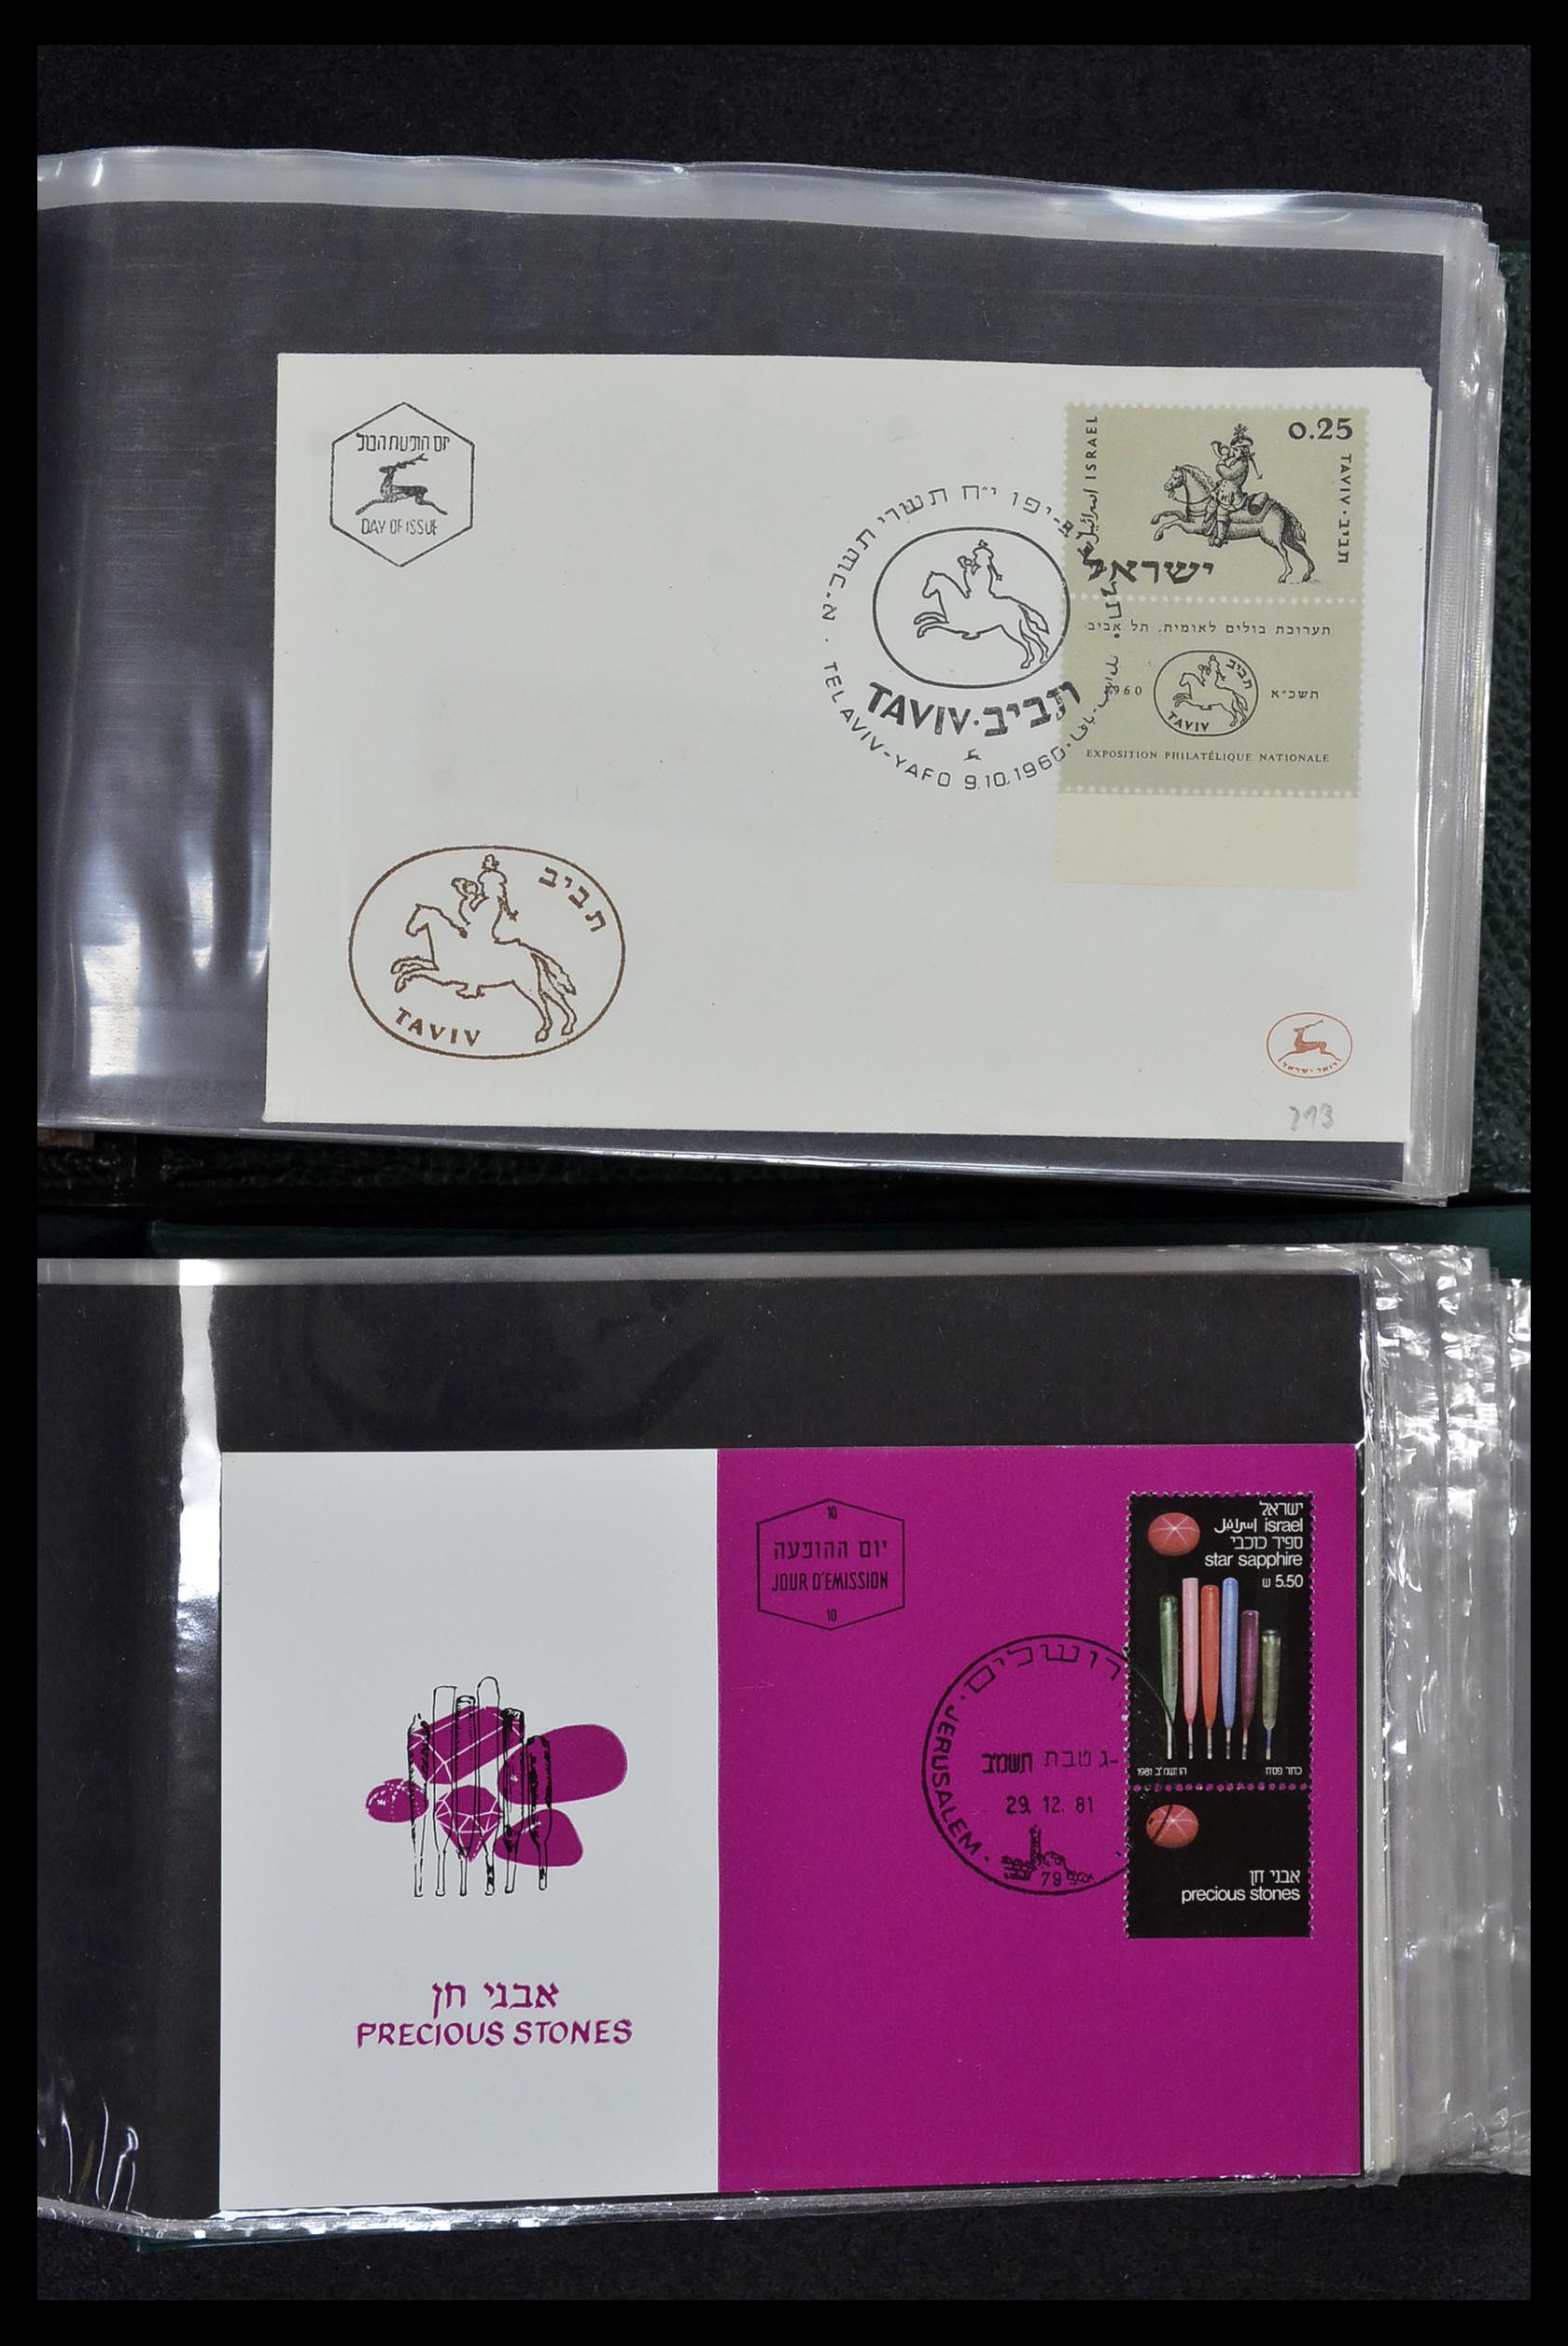 34217 042 - Stamp collection 34217 Israël covers and FDC's 1949-1985.